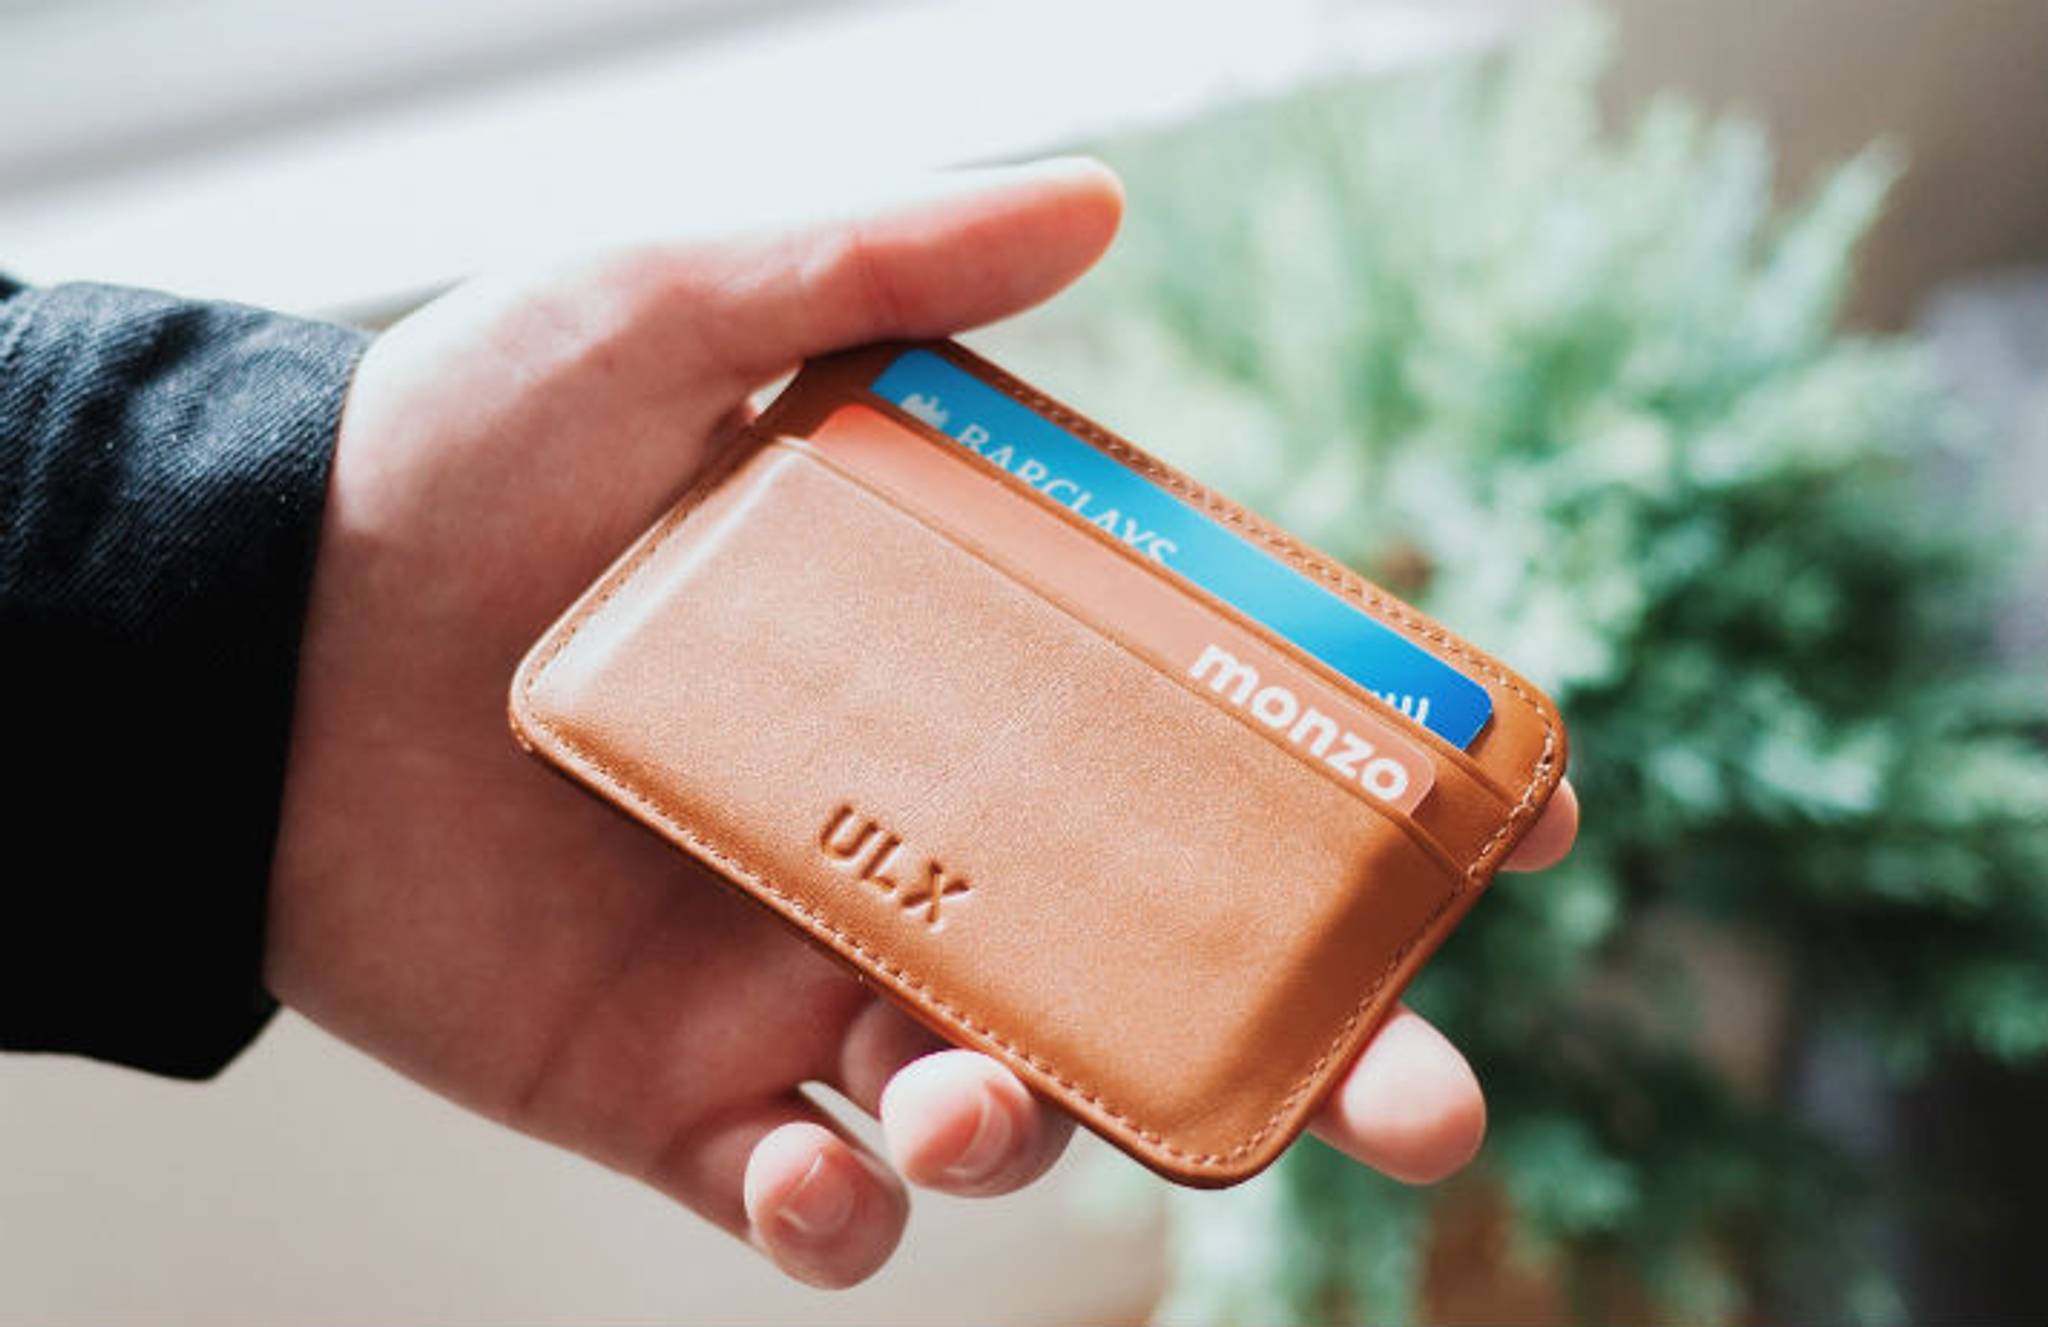 Monzo’s clarity makes it UK’s most recommended brand